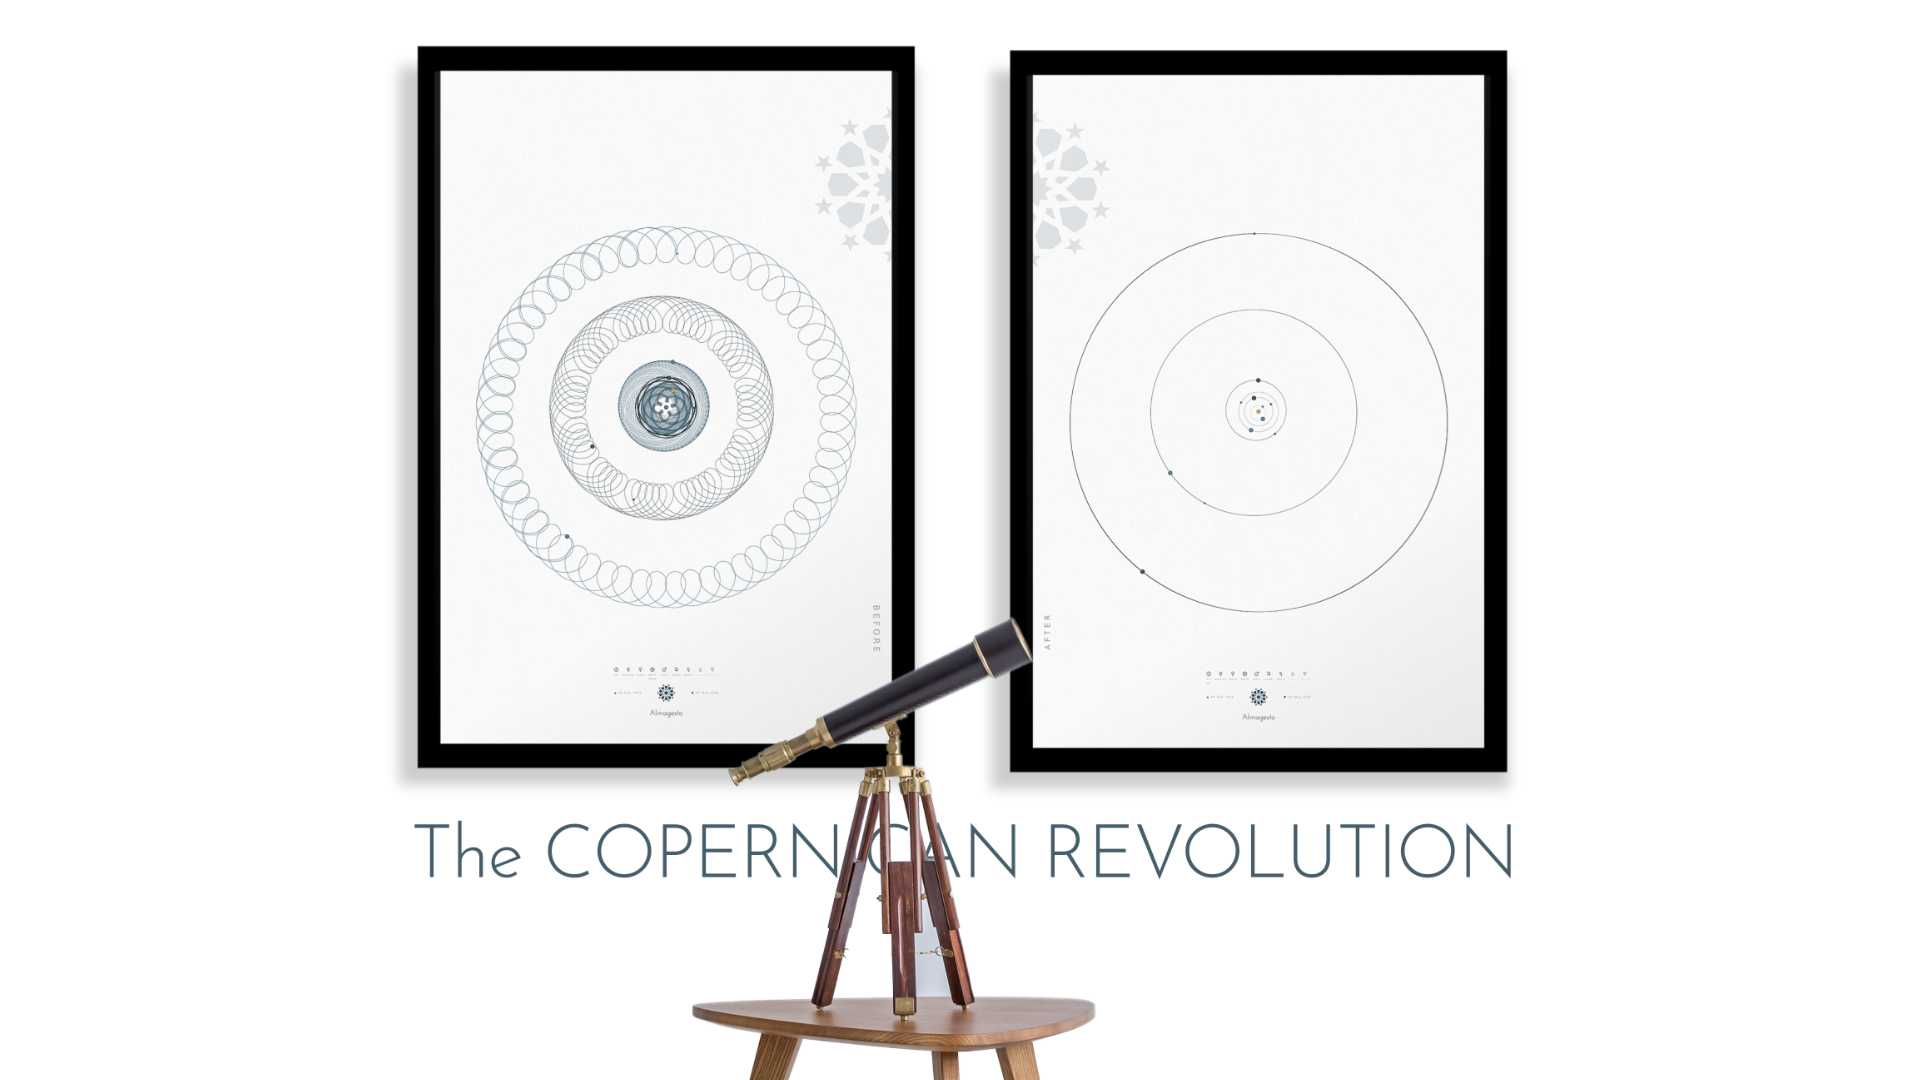 A special designed duo of posters to celebrate the Copernican paradigm shift from the Geocentric to the Heliocentric frame of reference.